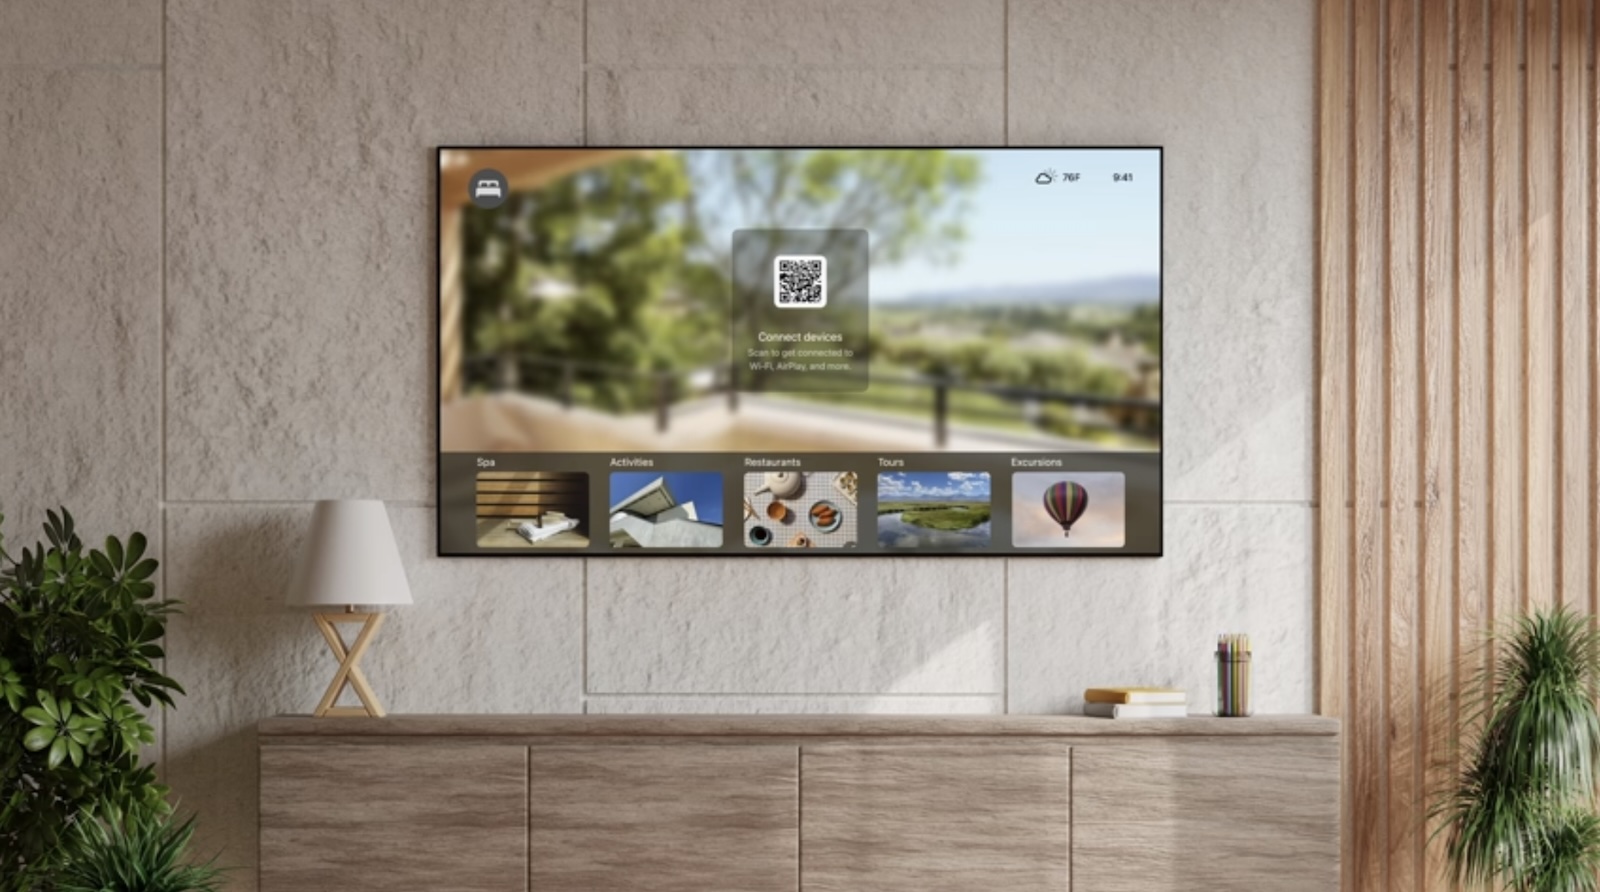 iOS 17's New AirPlay Feature for Hotel Room TVs Begins Rolling Out